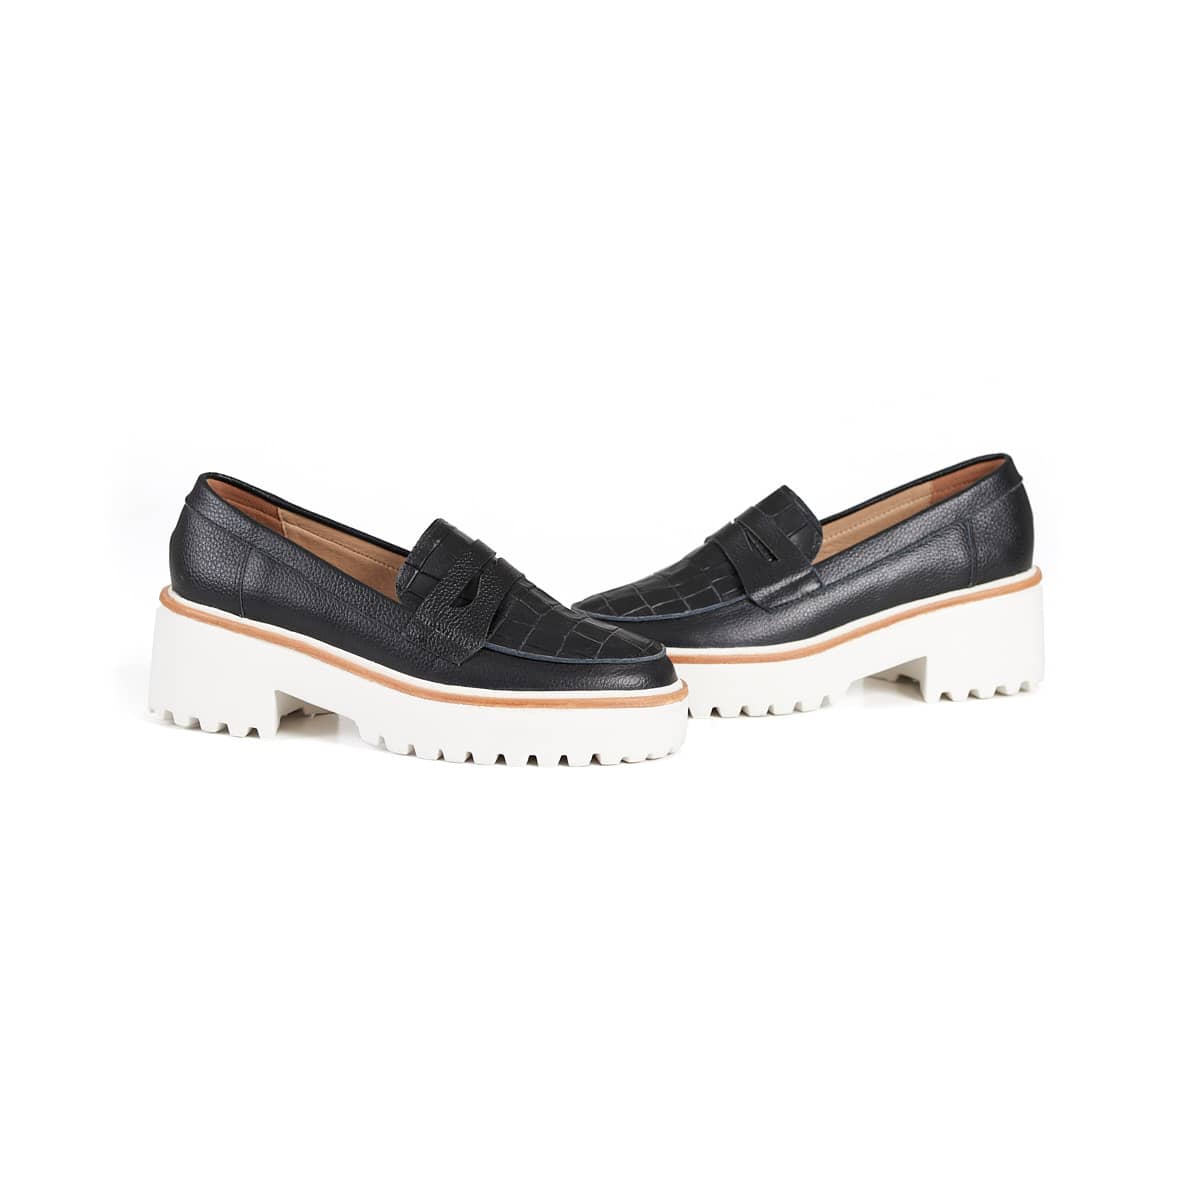 Zapatos Tipo Loafer Para Mujer Con Plataforma - Ref. Z-2764N - DFV Leather  Shoes & Bags